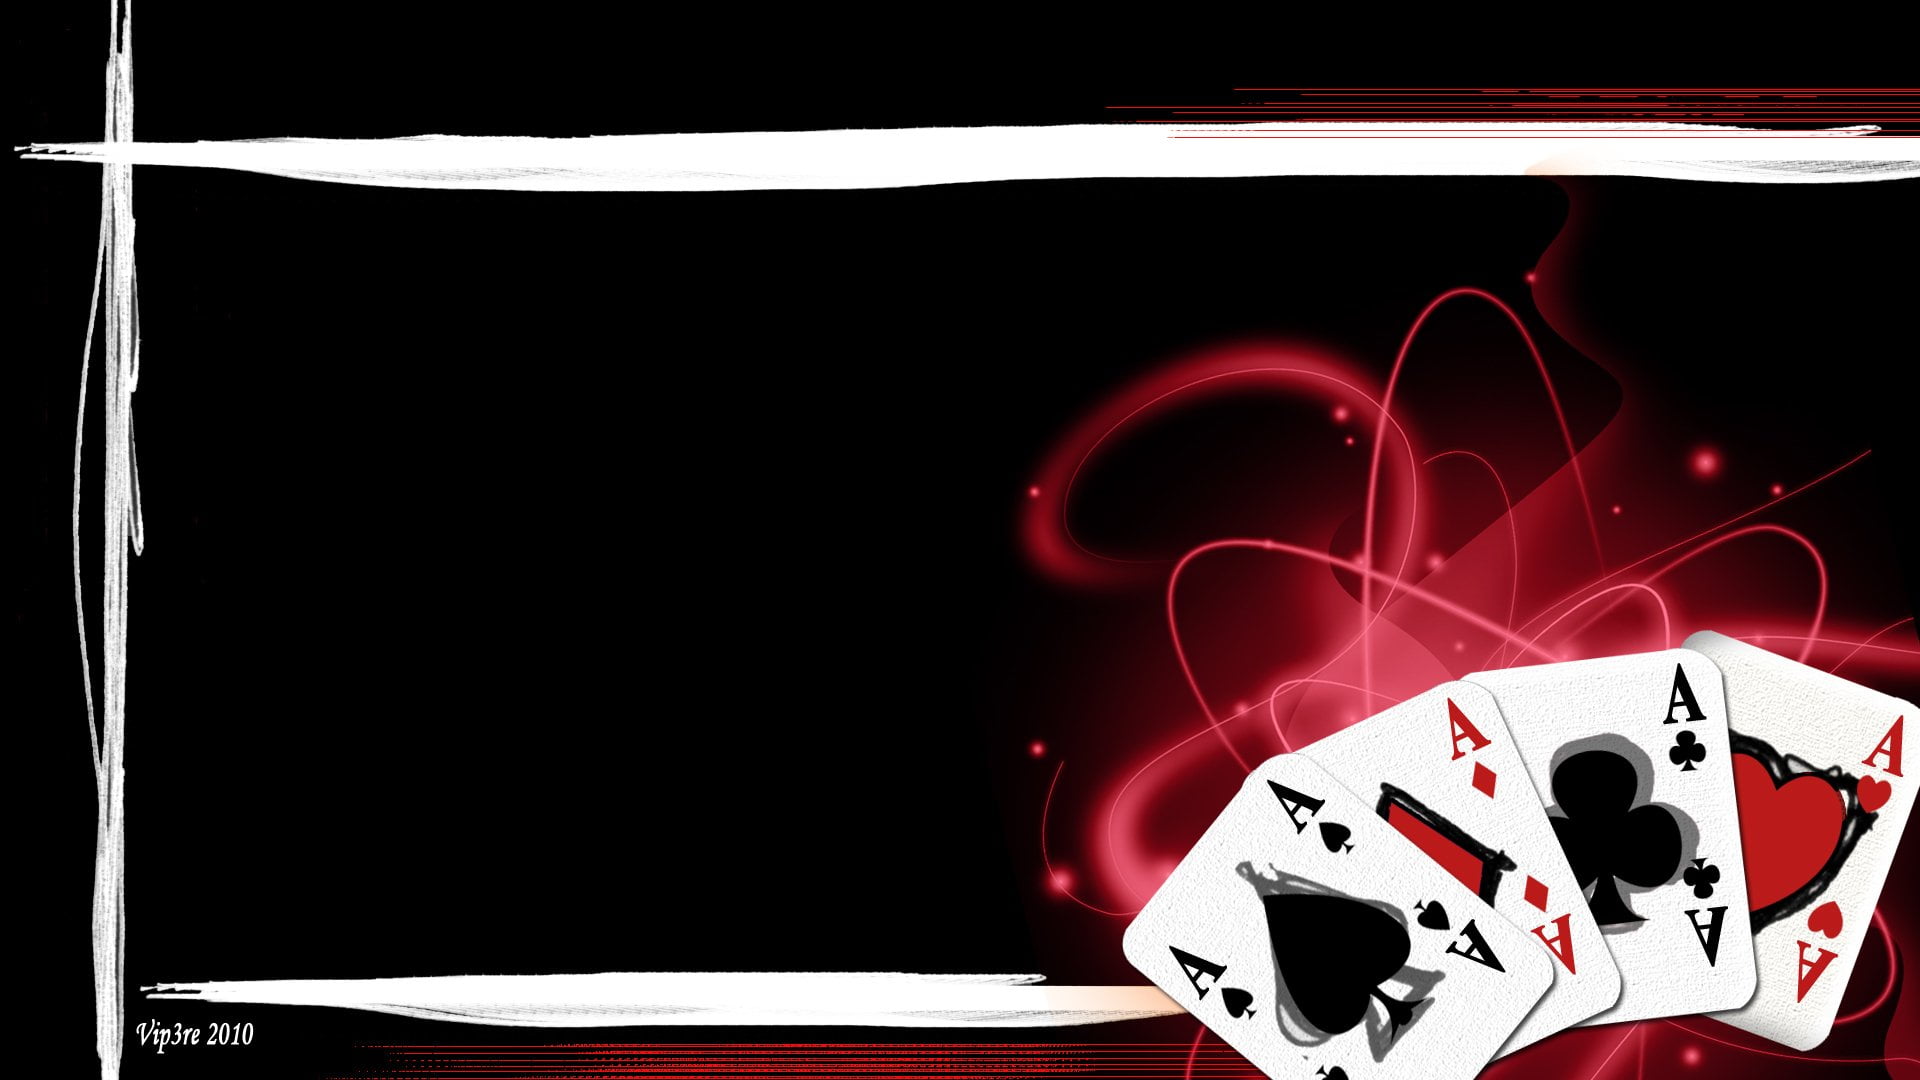 three A's of spade, diamond, and heart playing cards, Game, red